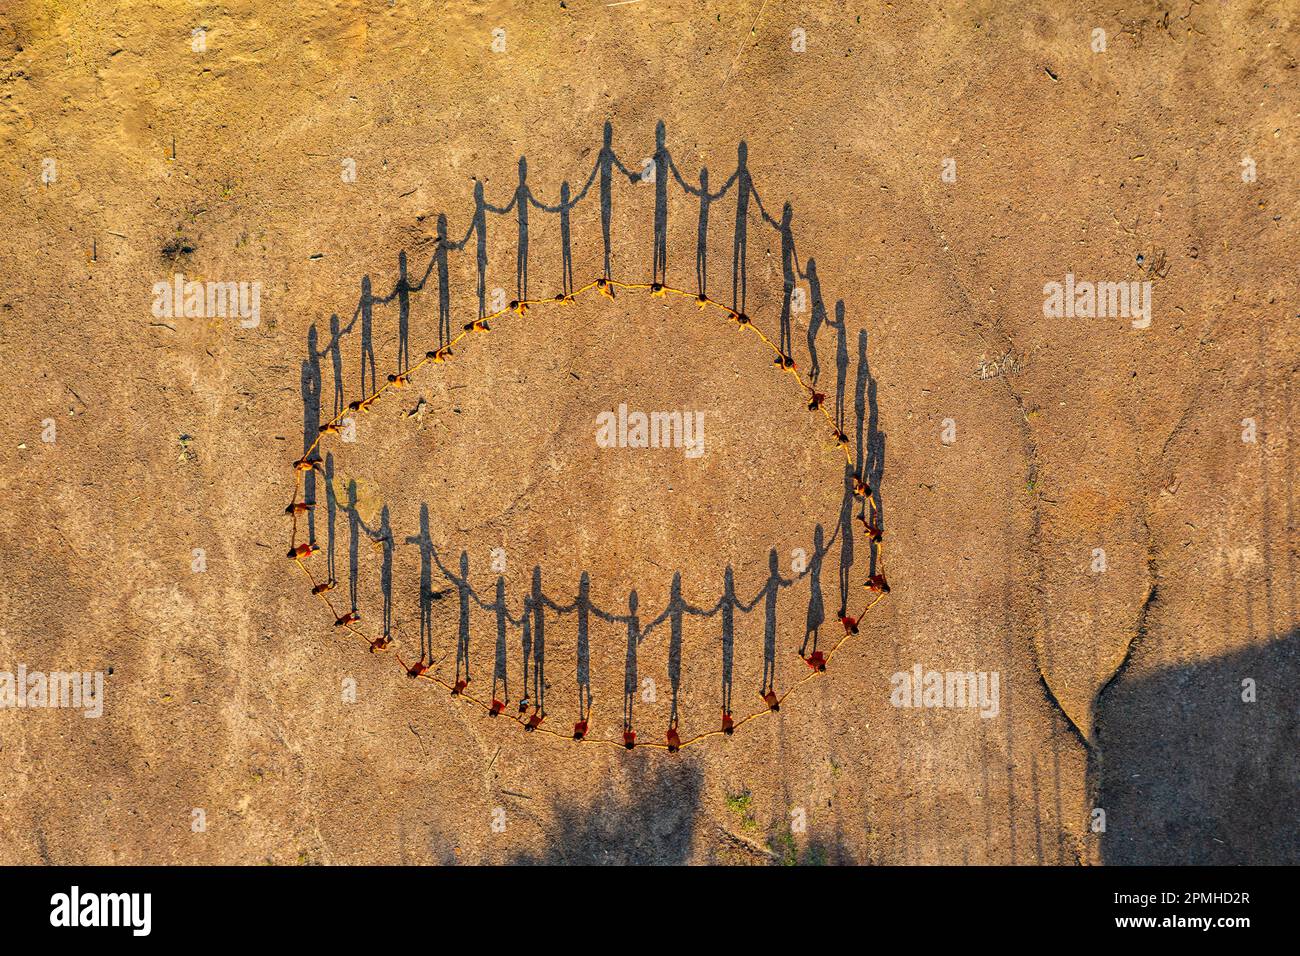 Aerial view of Yanomami tribe, in a circle, and shadows, southern Venezuela, South America Stock Photo